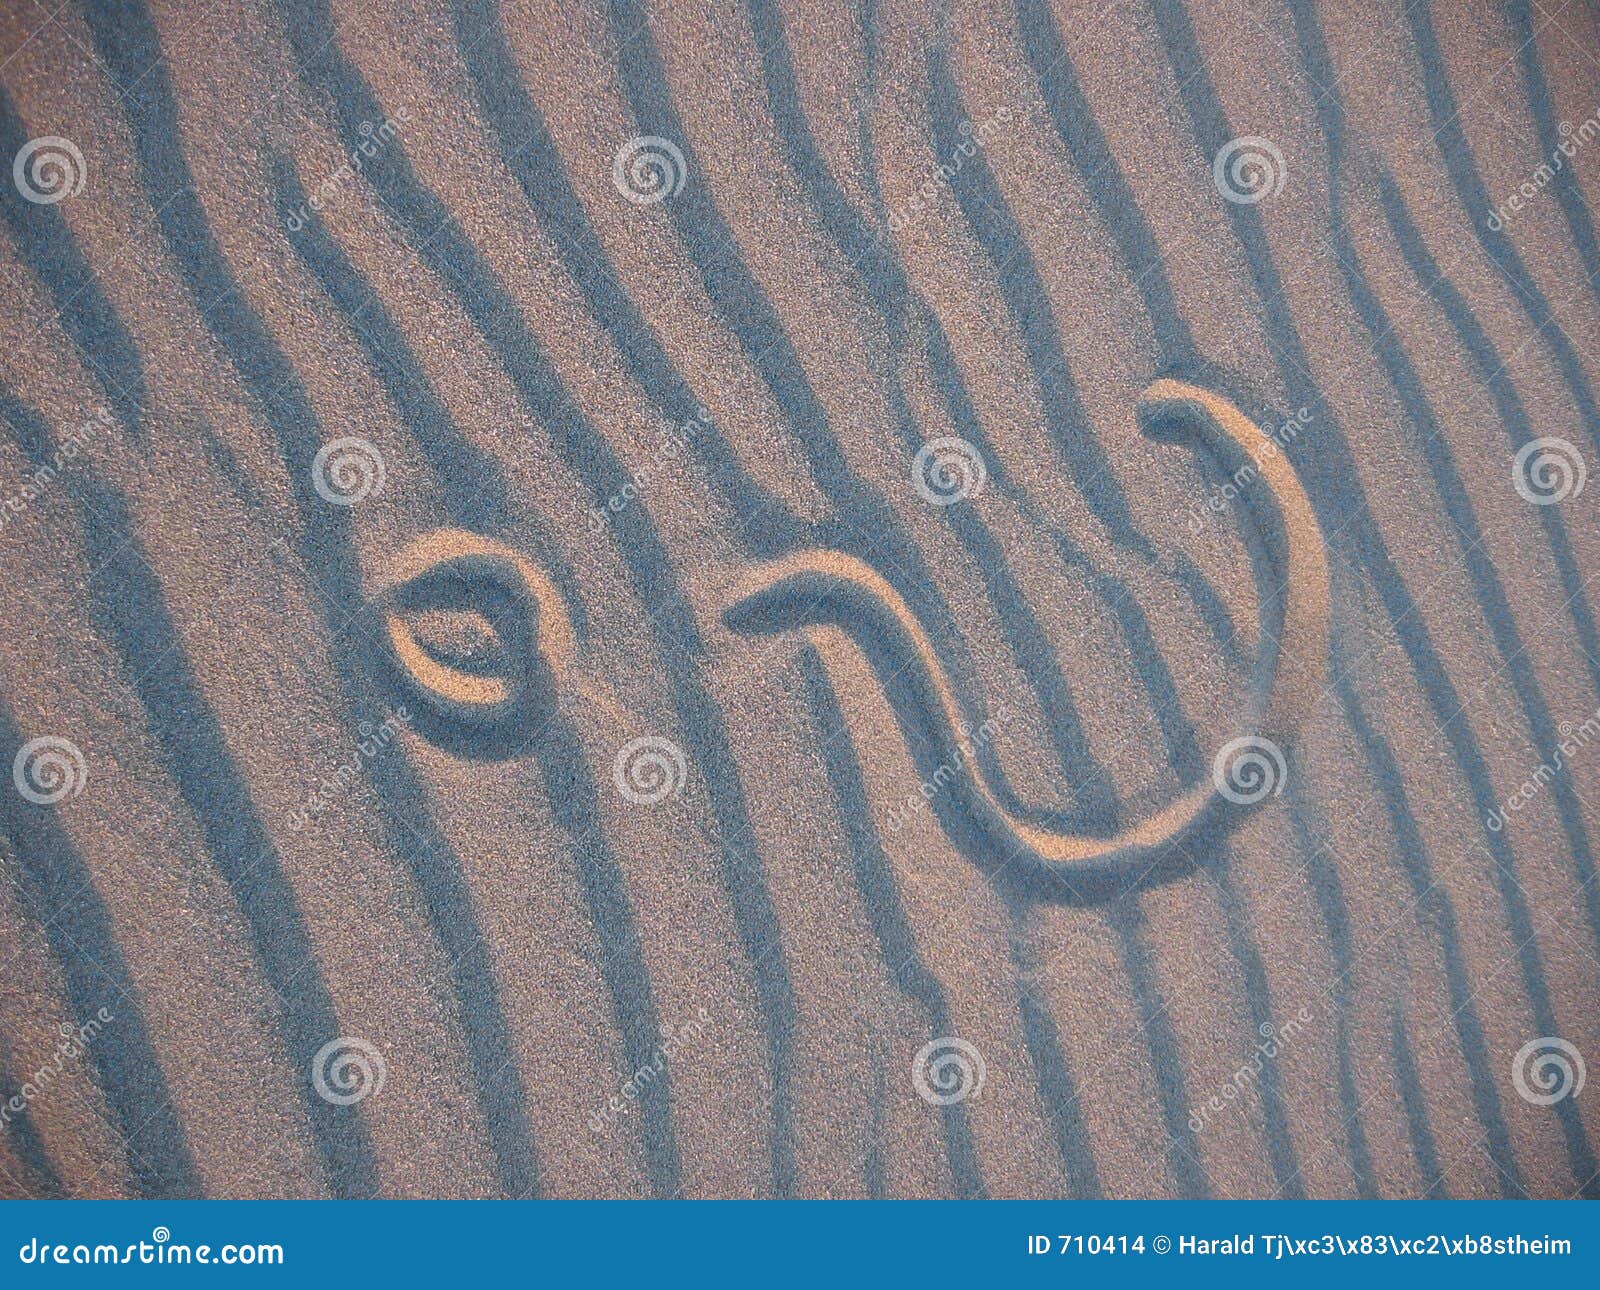 questionmark in sand